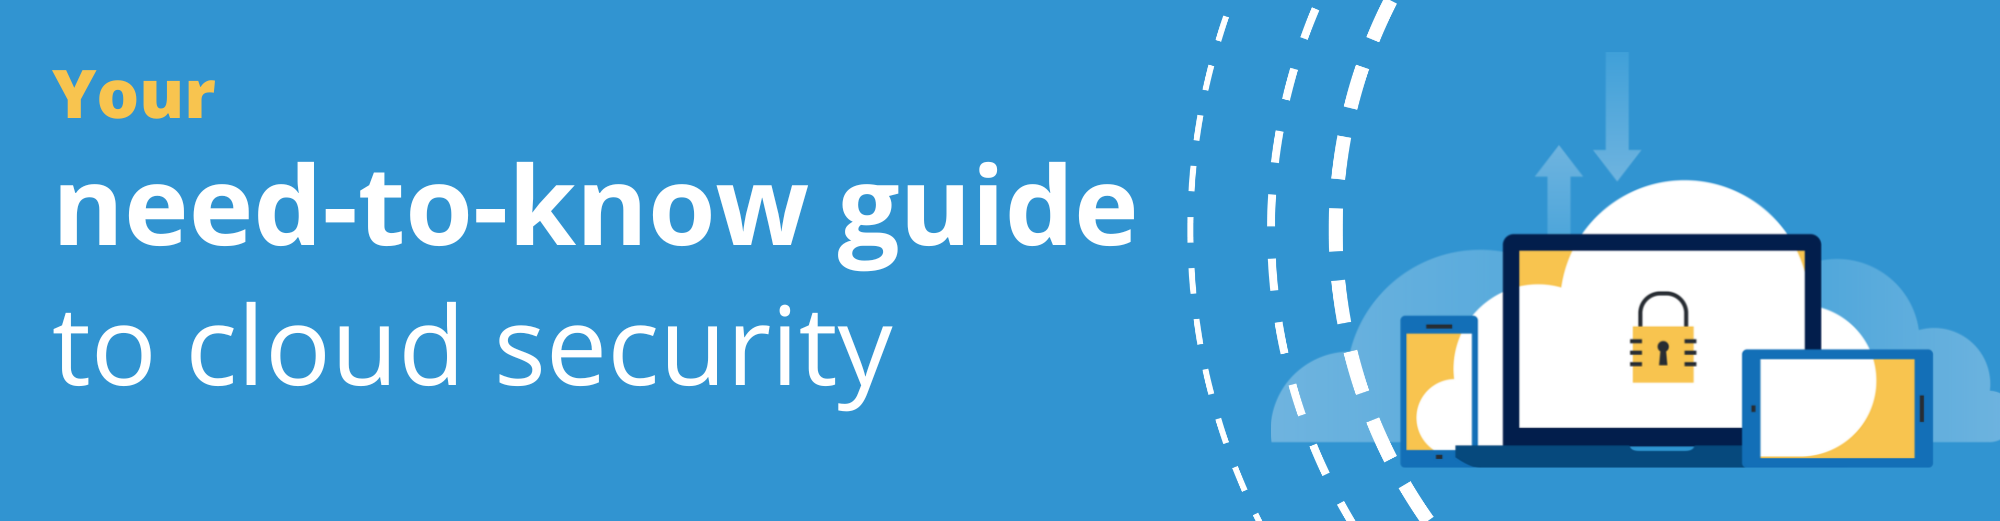 Download your guide to cloud security from Adept Networks today.